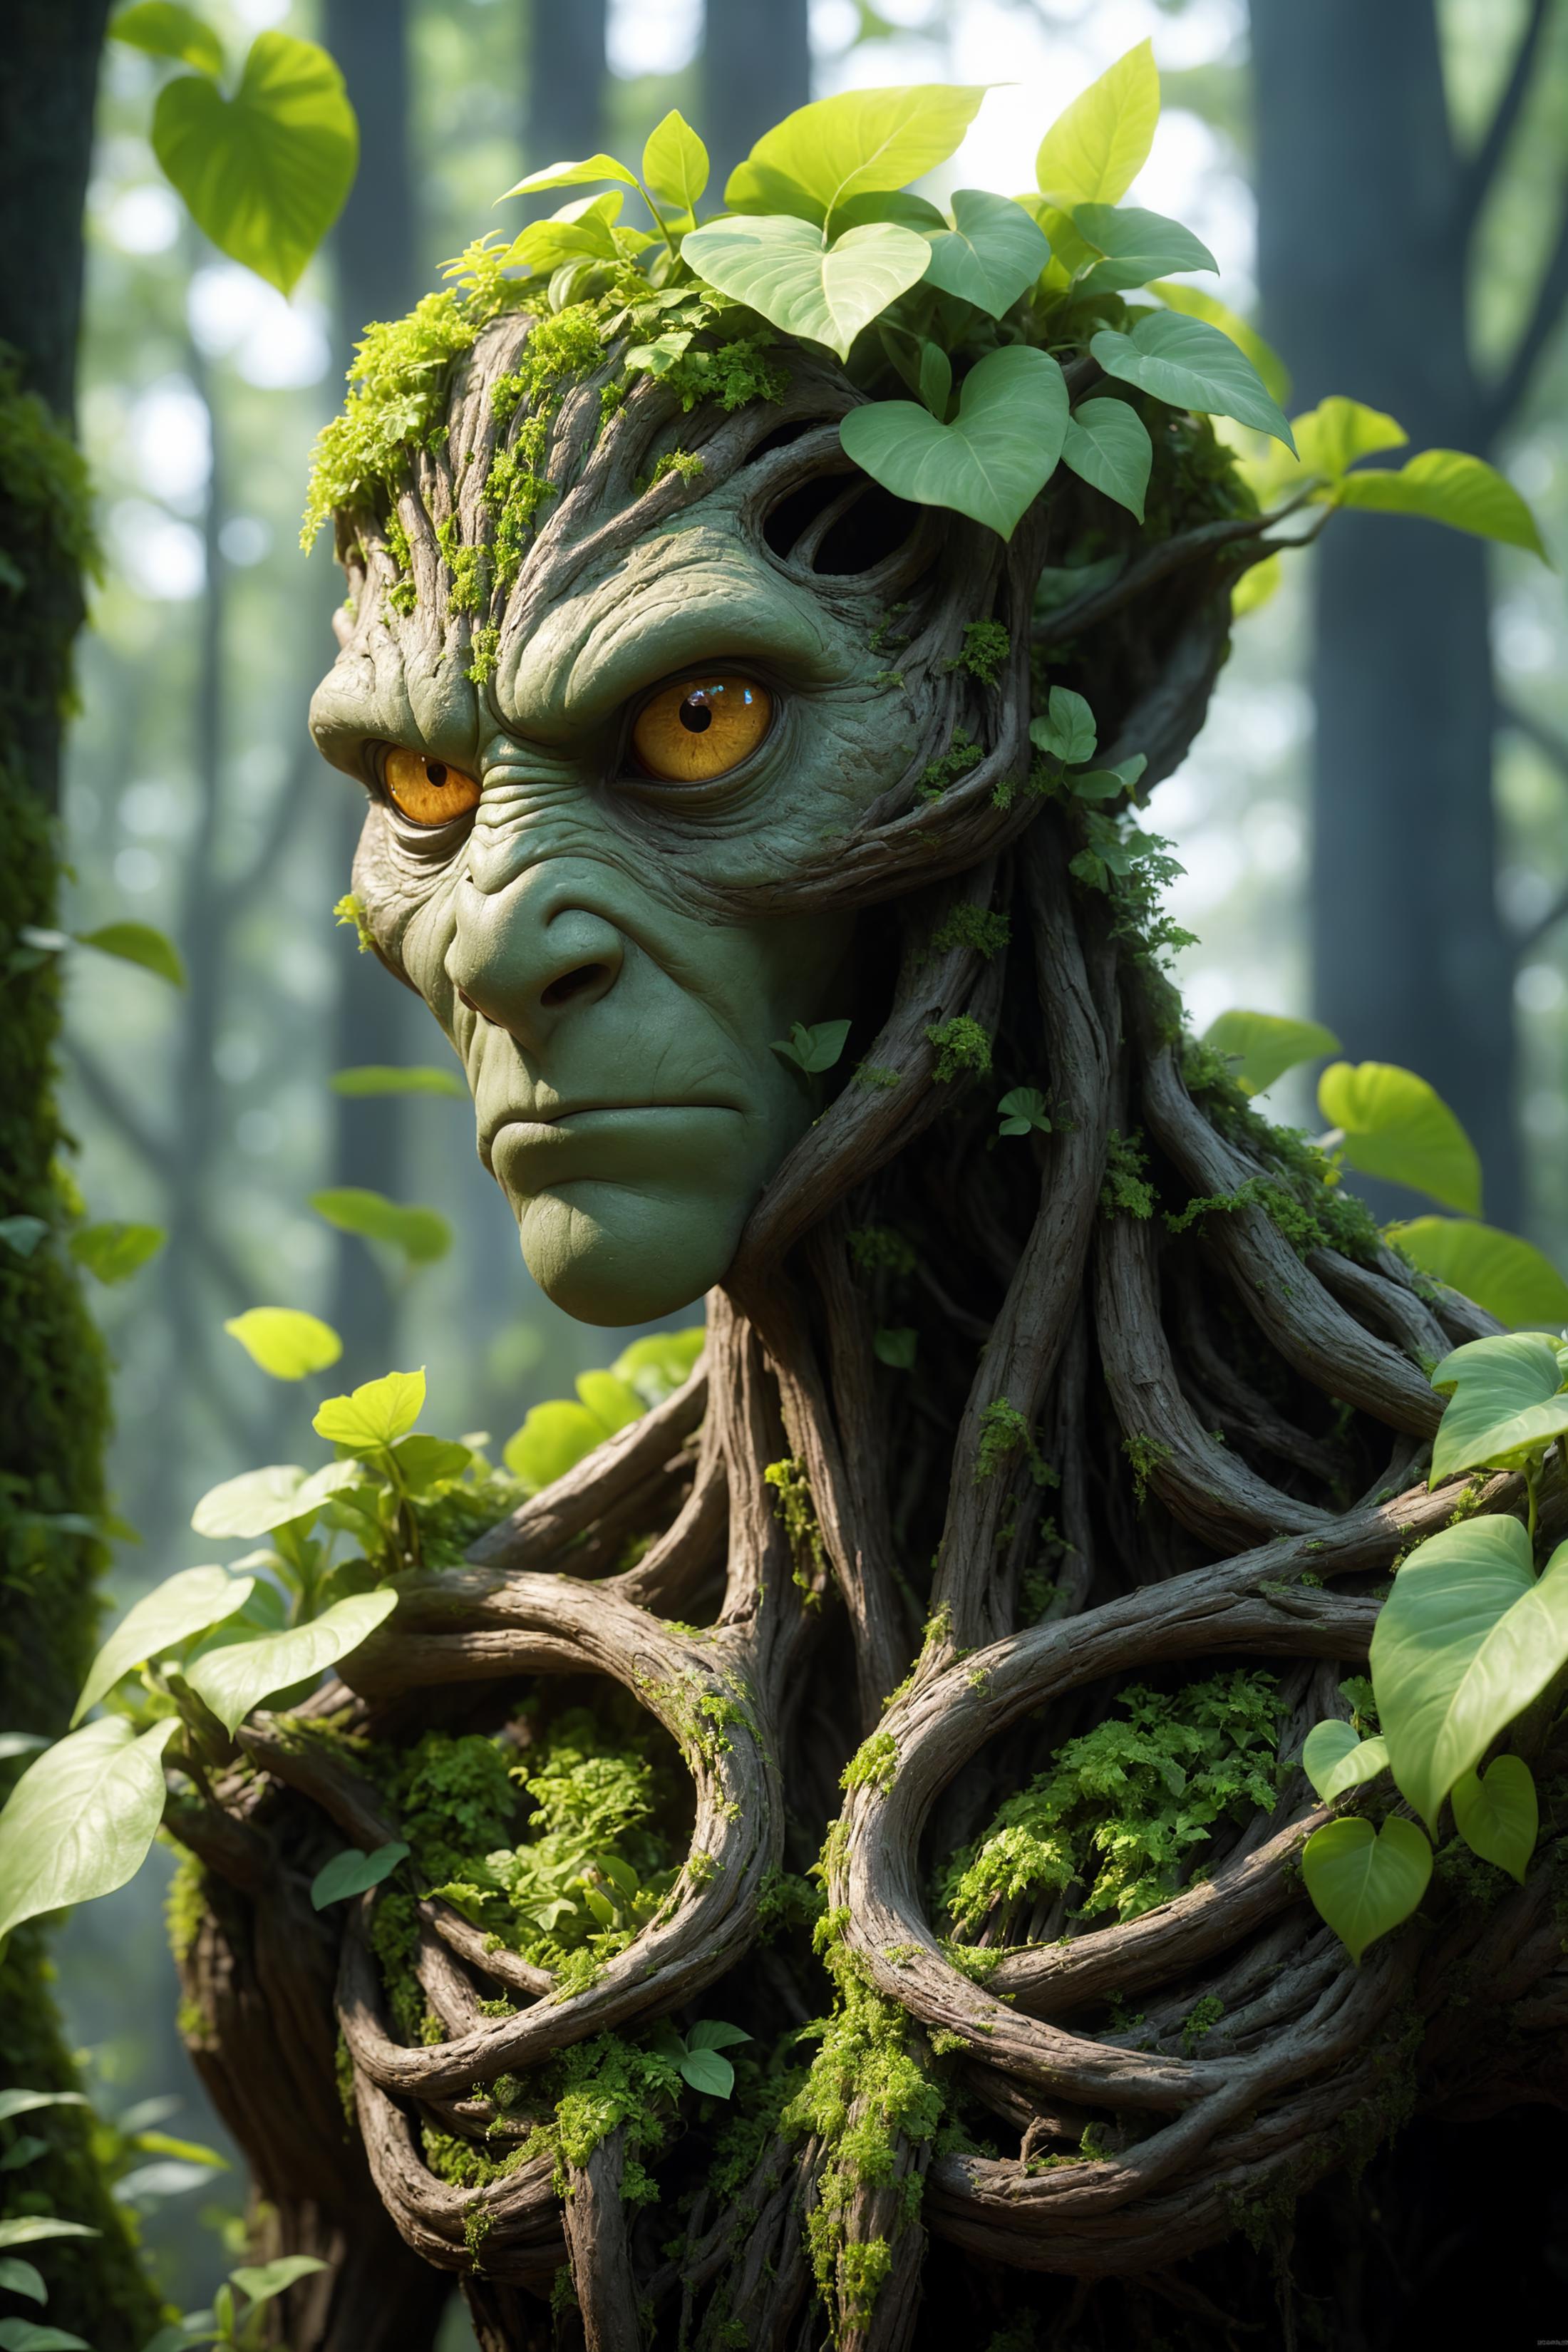 A green, tree-like creature with yellow eyes and a grumpy expression.